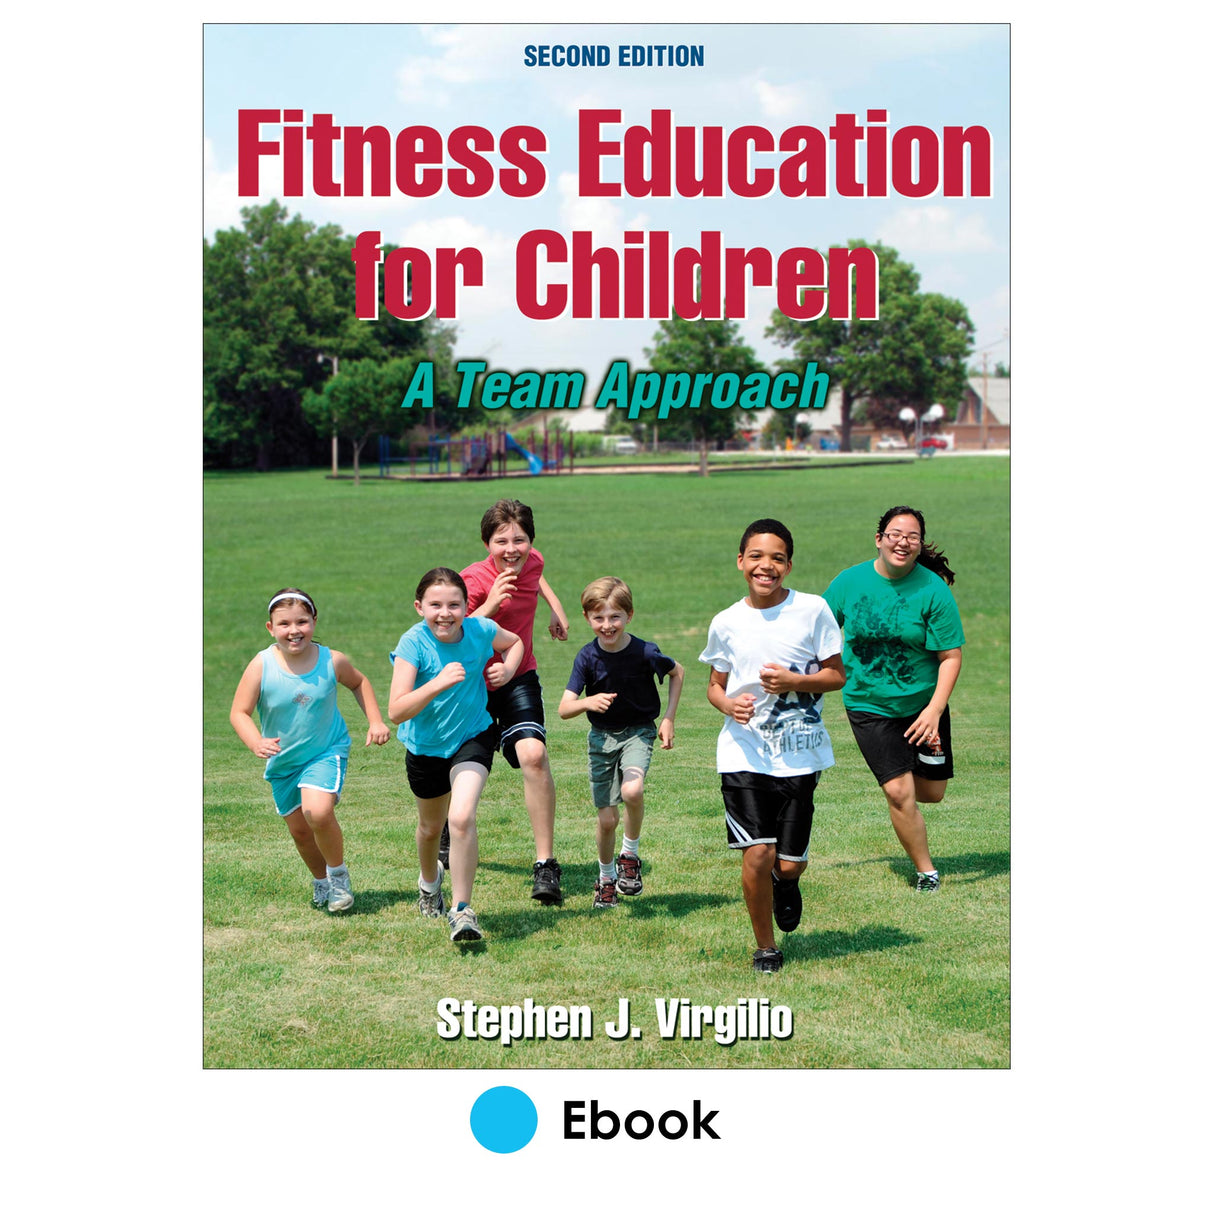 Fitness Education for Children 2nd Edition PDF